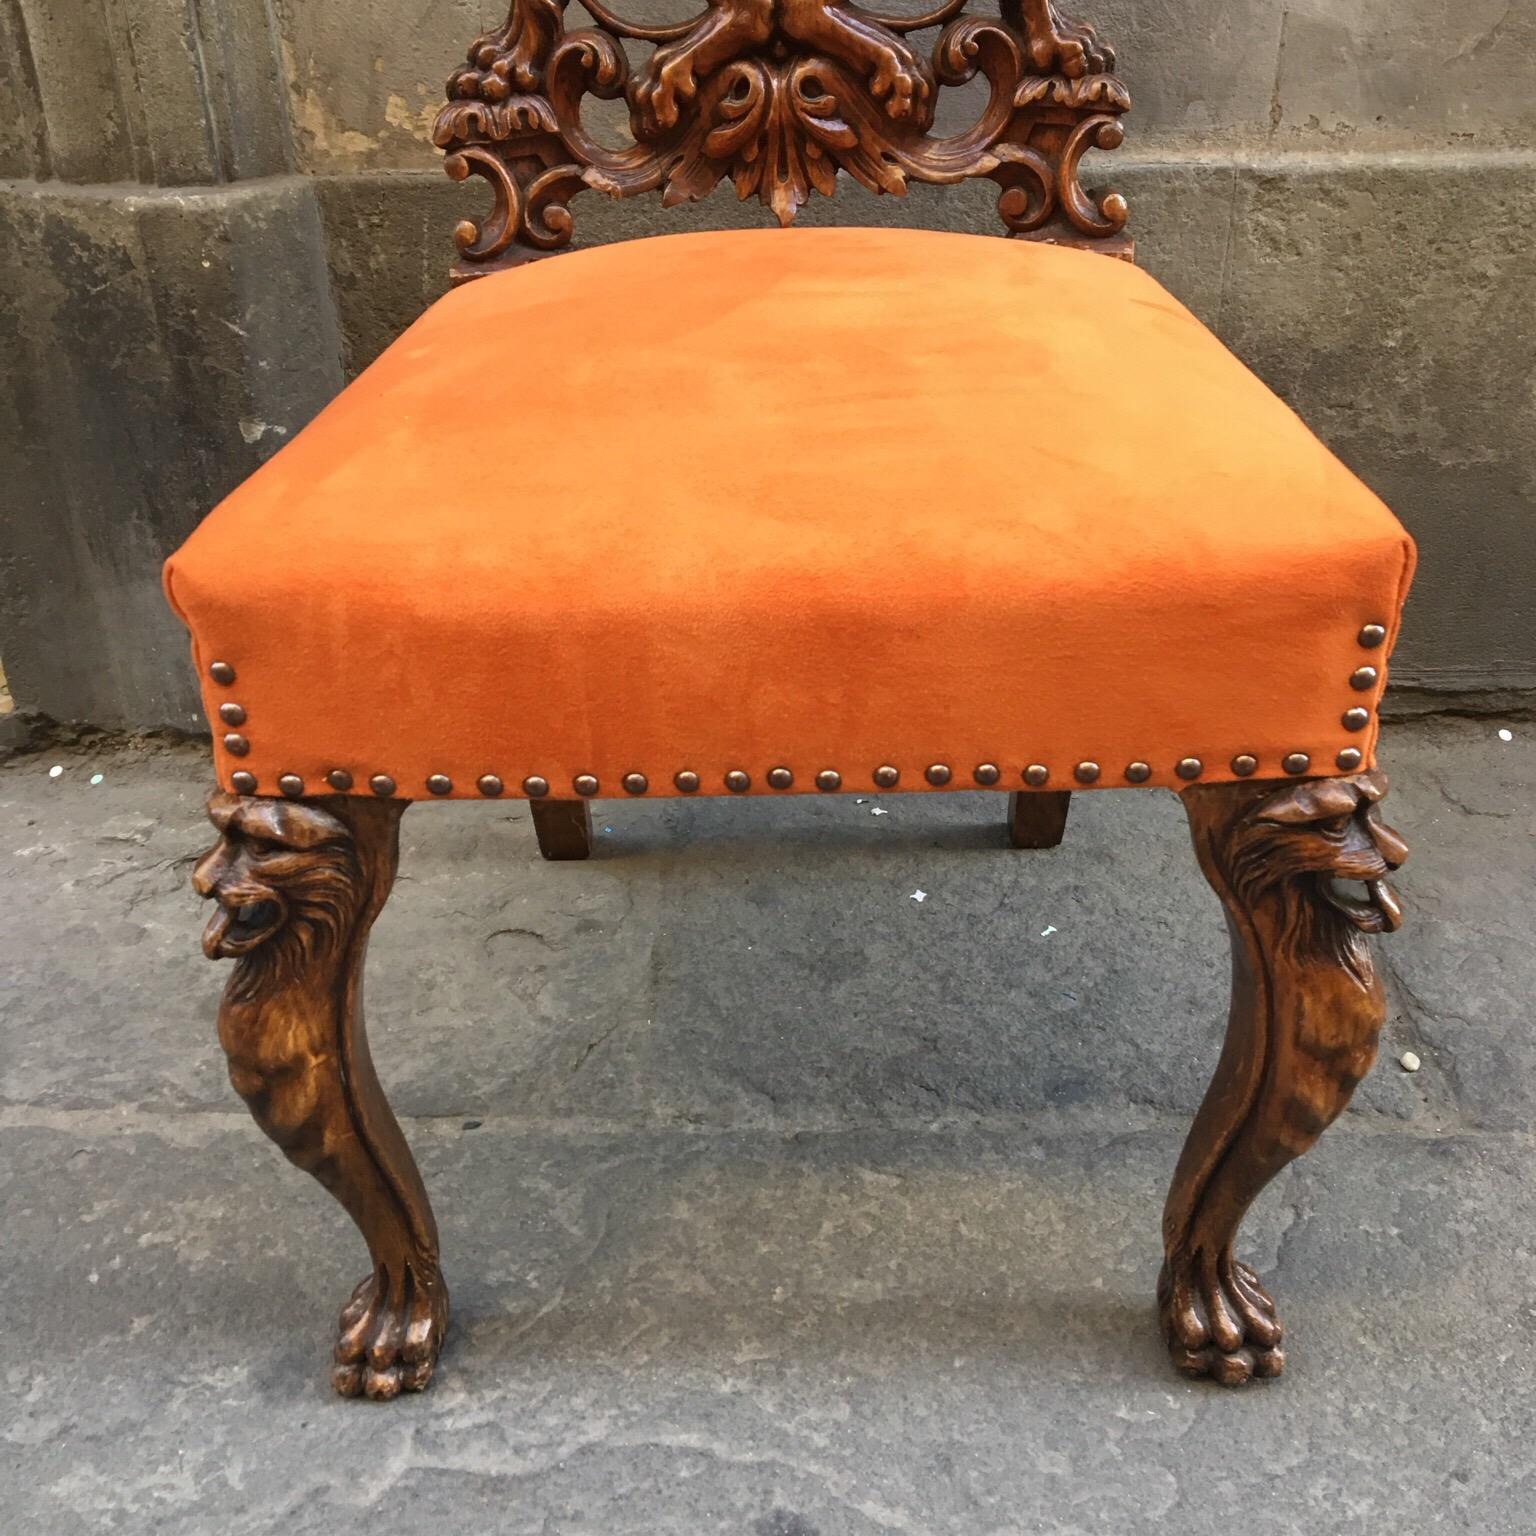 Pair of Carved Renaissance-Style Wooden Chairs Orange Alcantara Seat, Early 1900 8